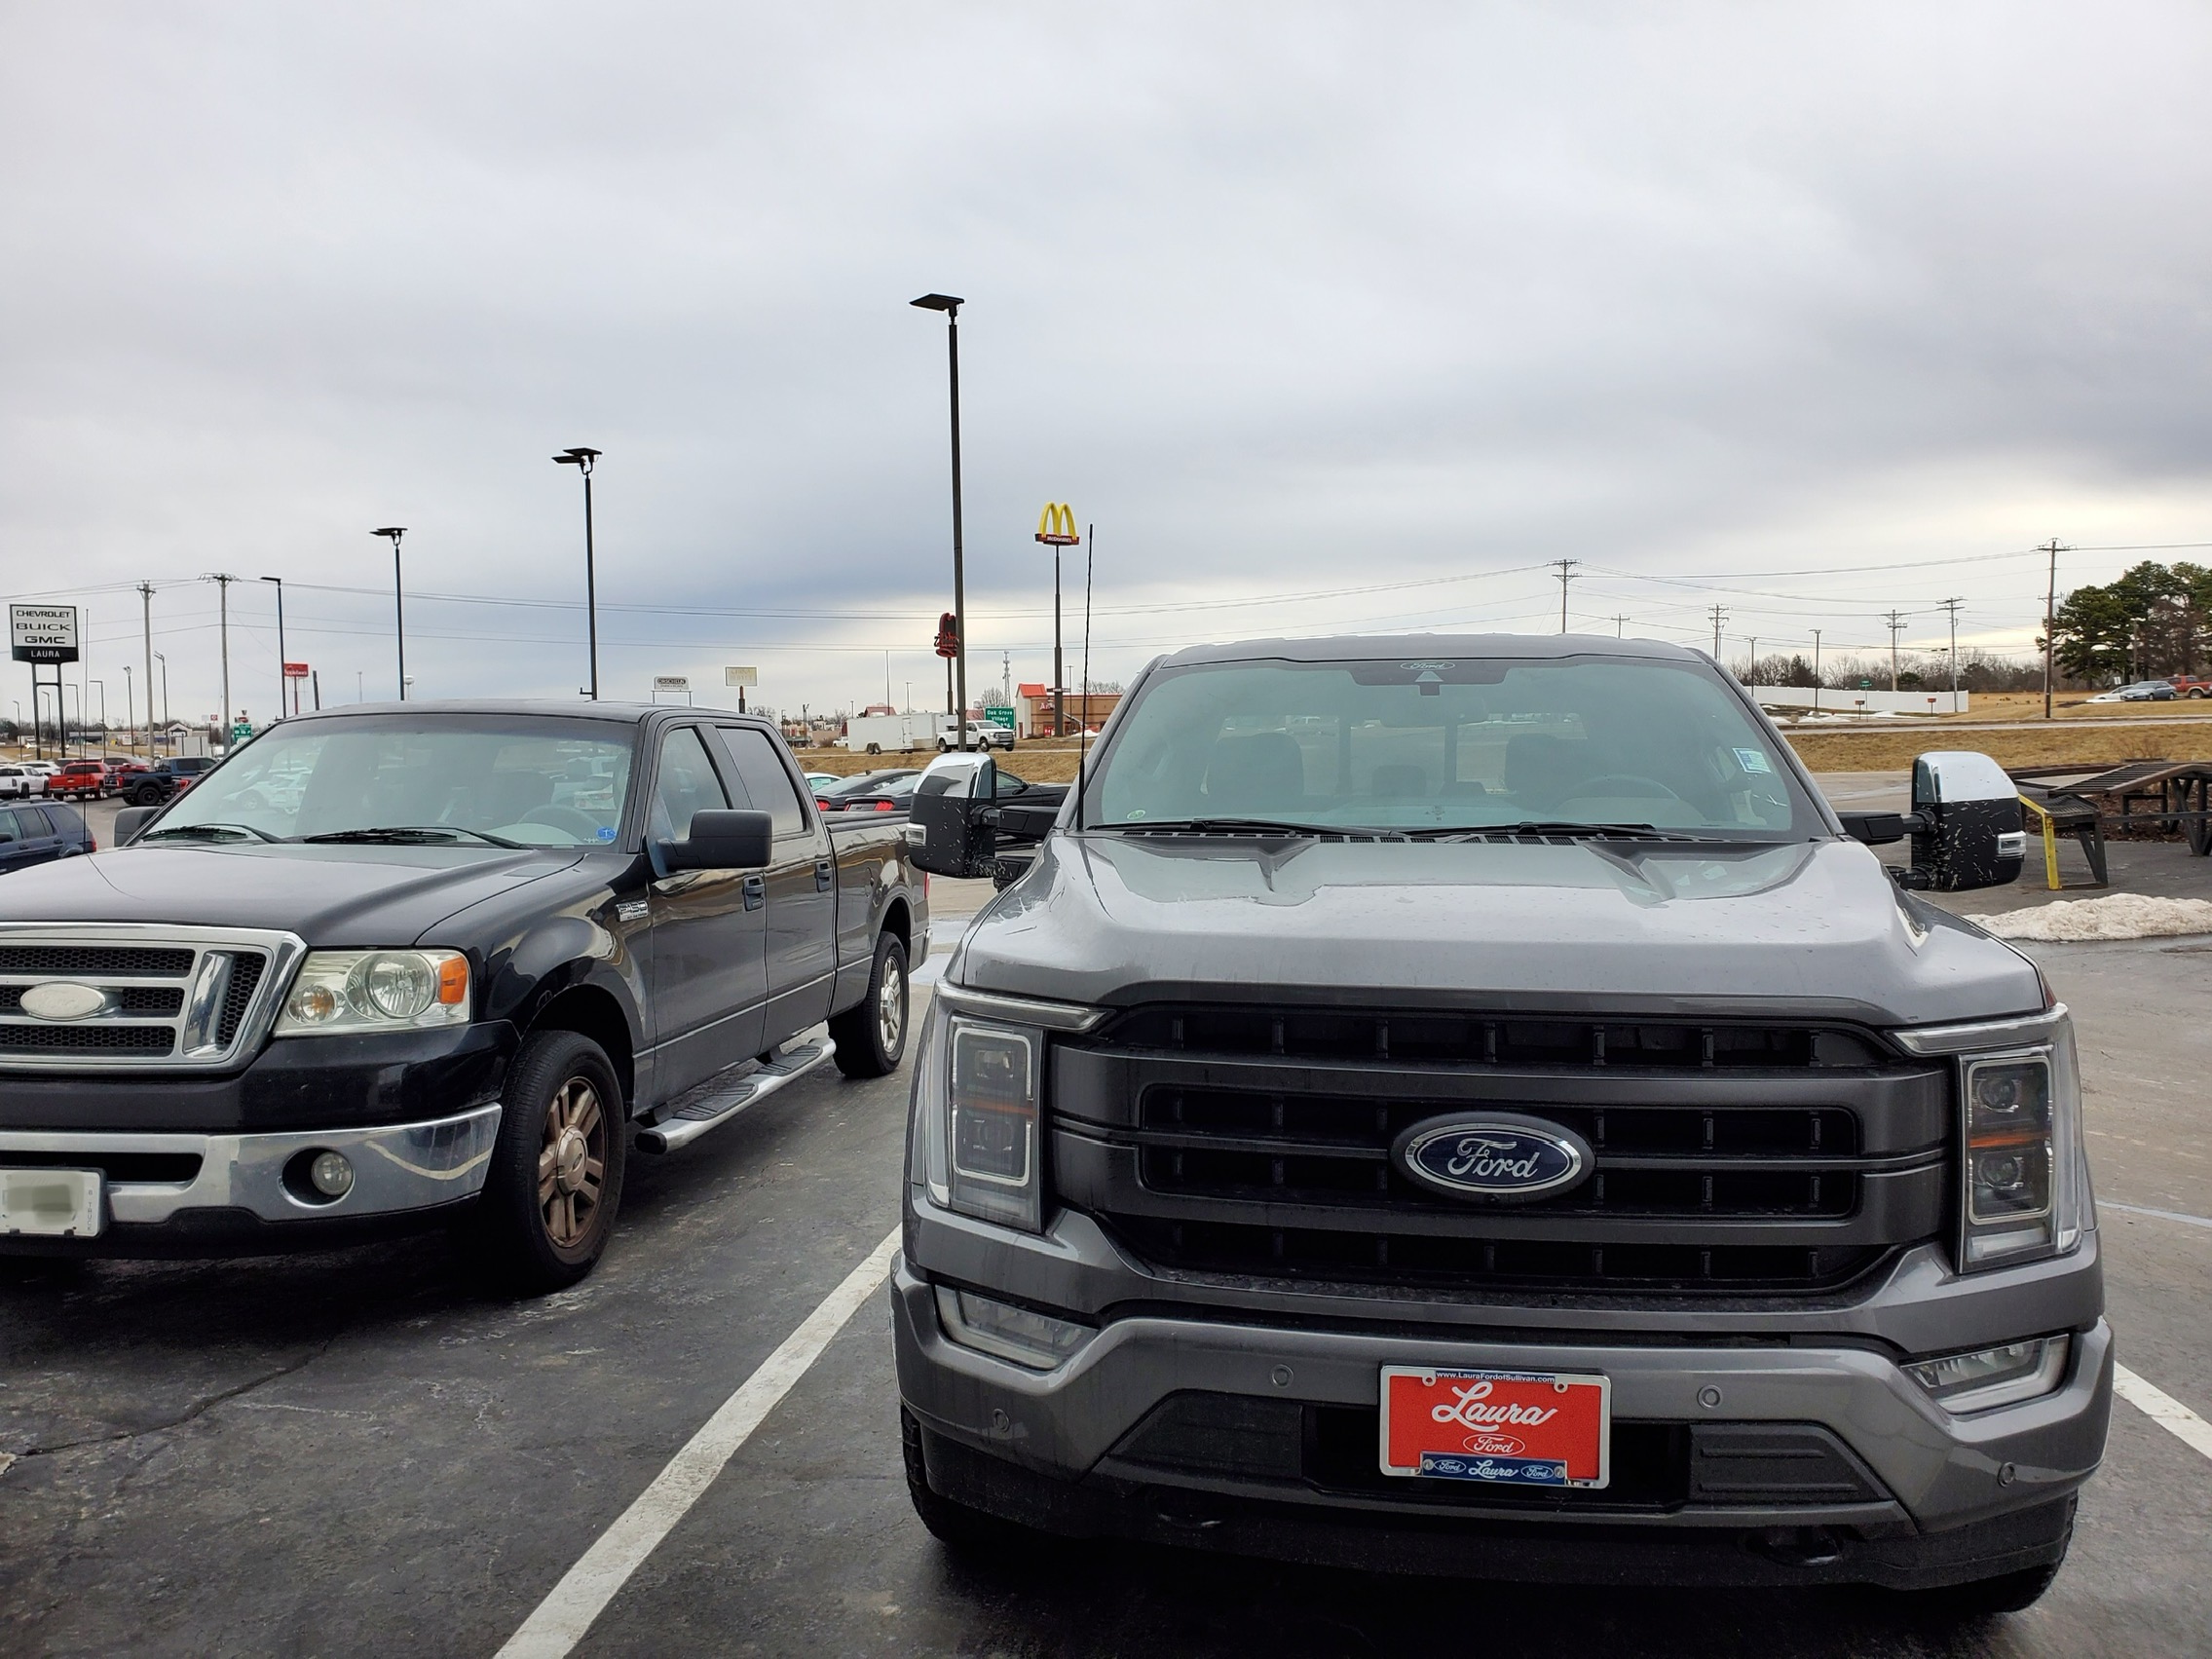 Ford F-150 "Old to New"- What did you drive before purchasing D08FEB85-3A3E-4A3F-8F6E-4DD696E7BC8D